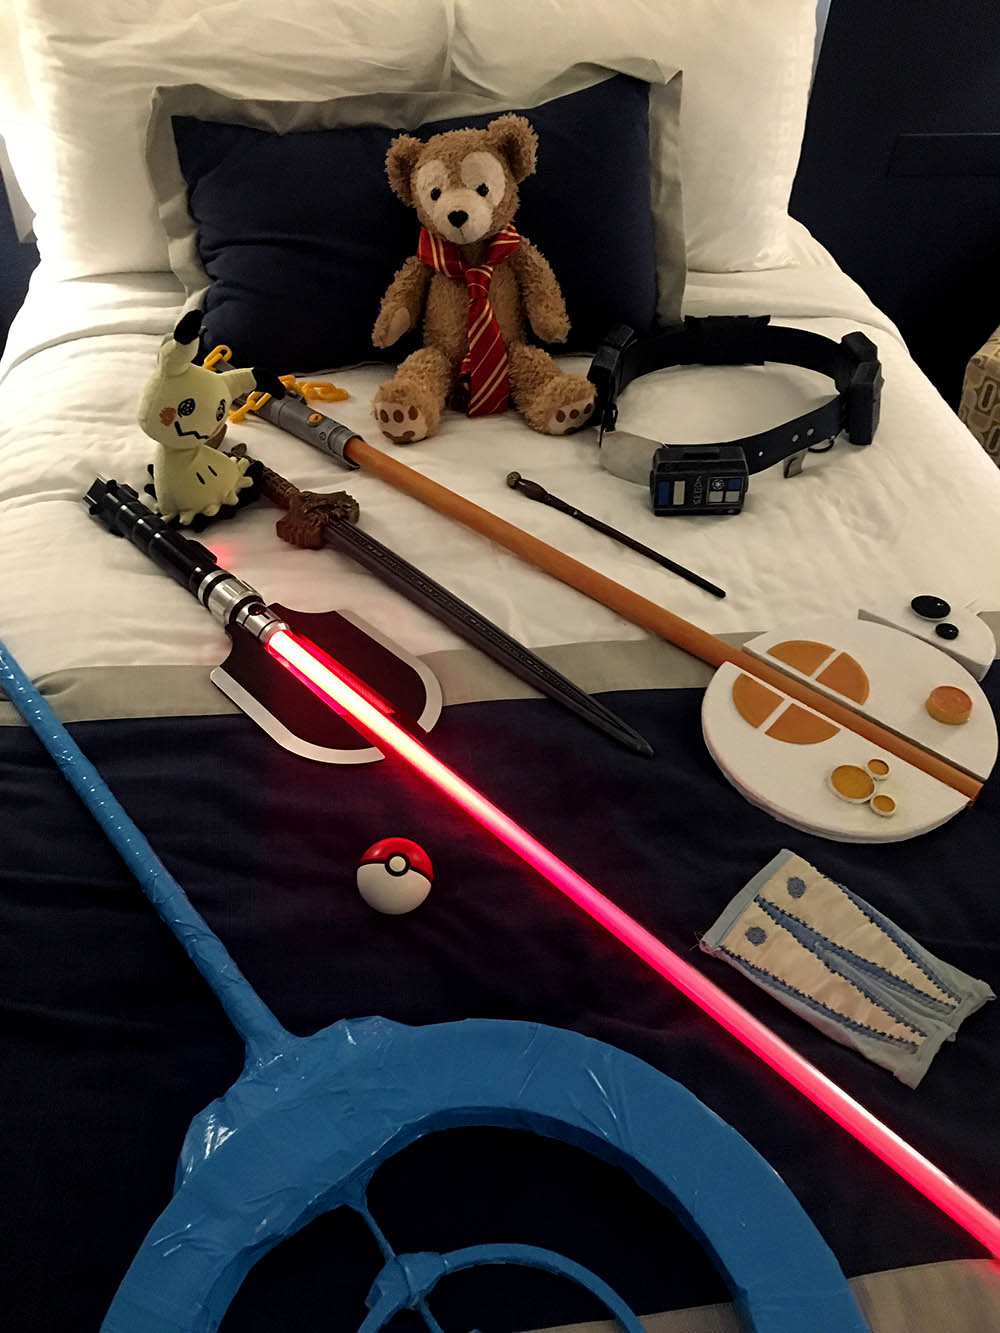 A Pokestop, lightsaber, keyblade, sword and Duffy on the bed.